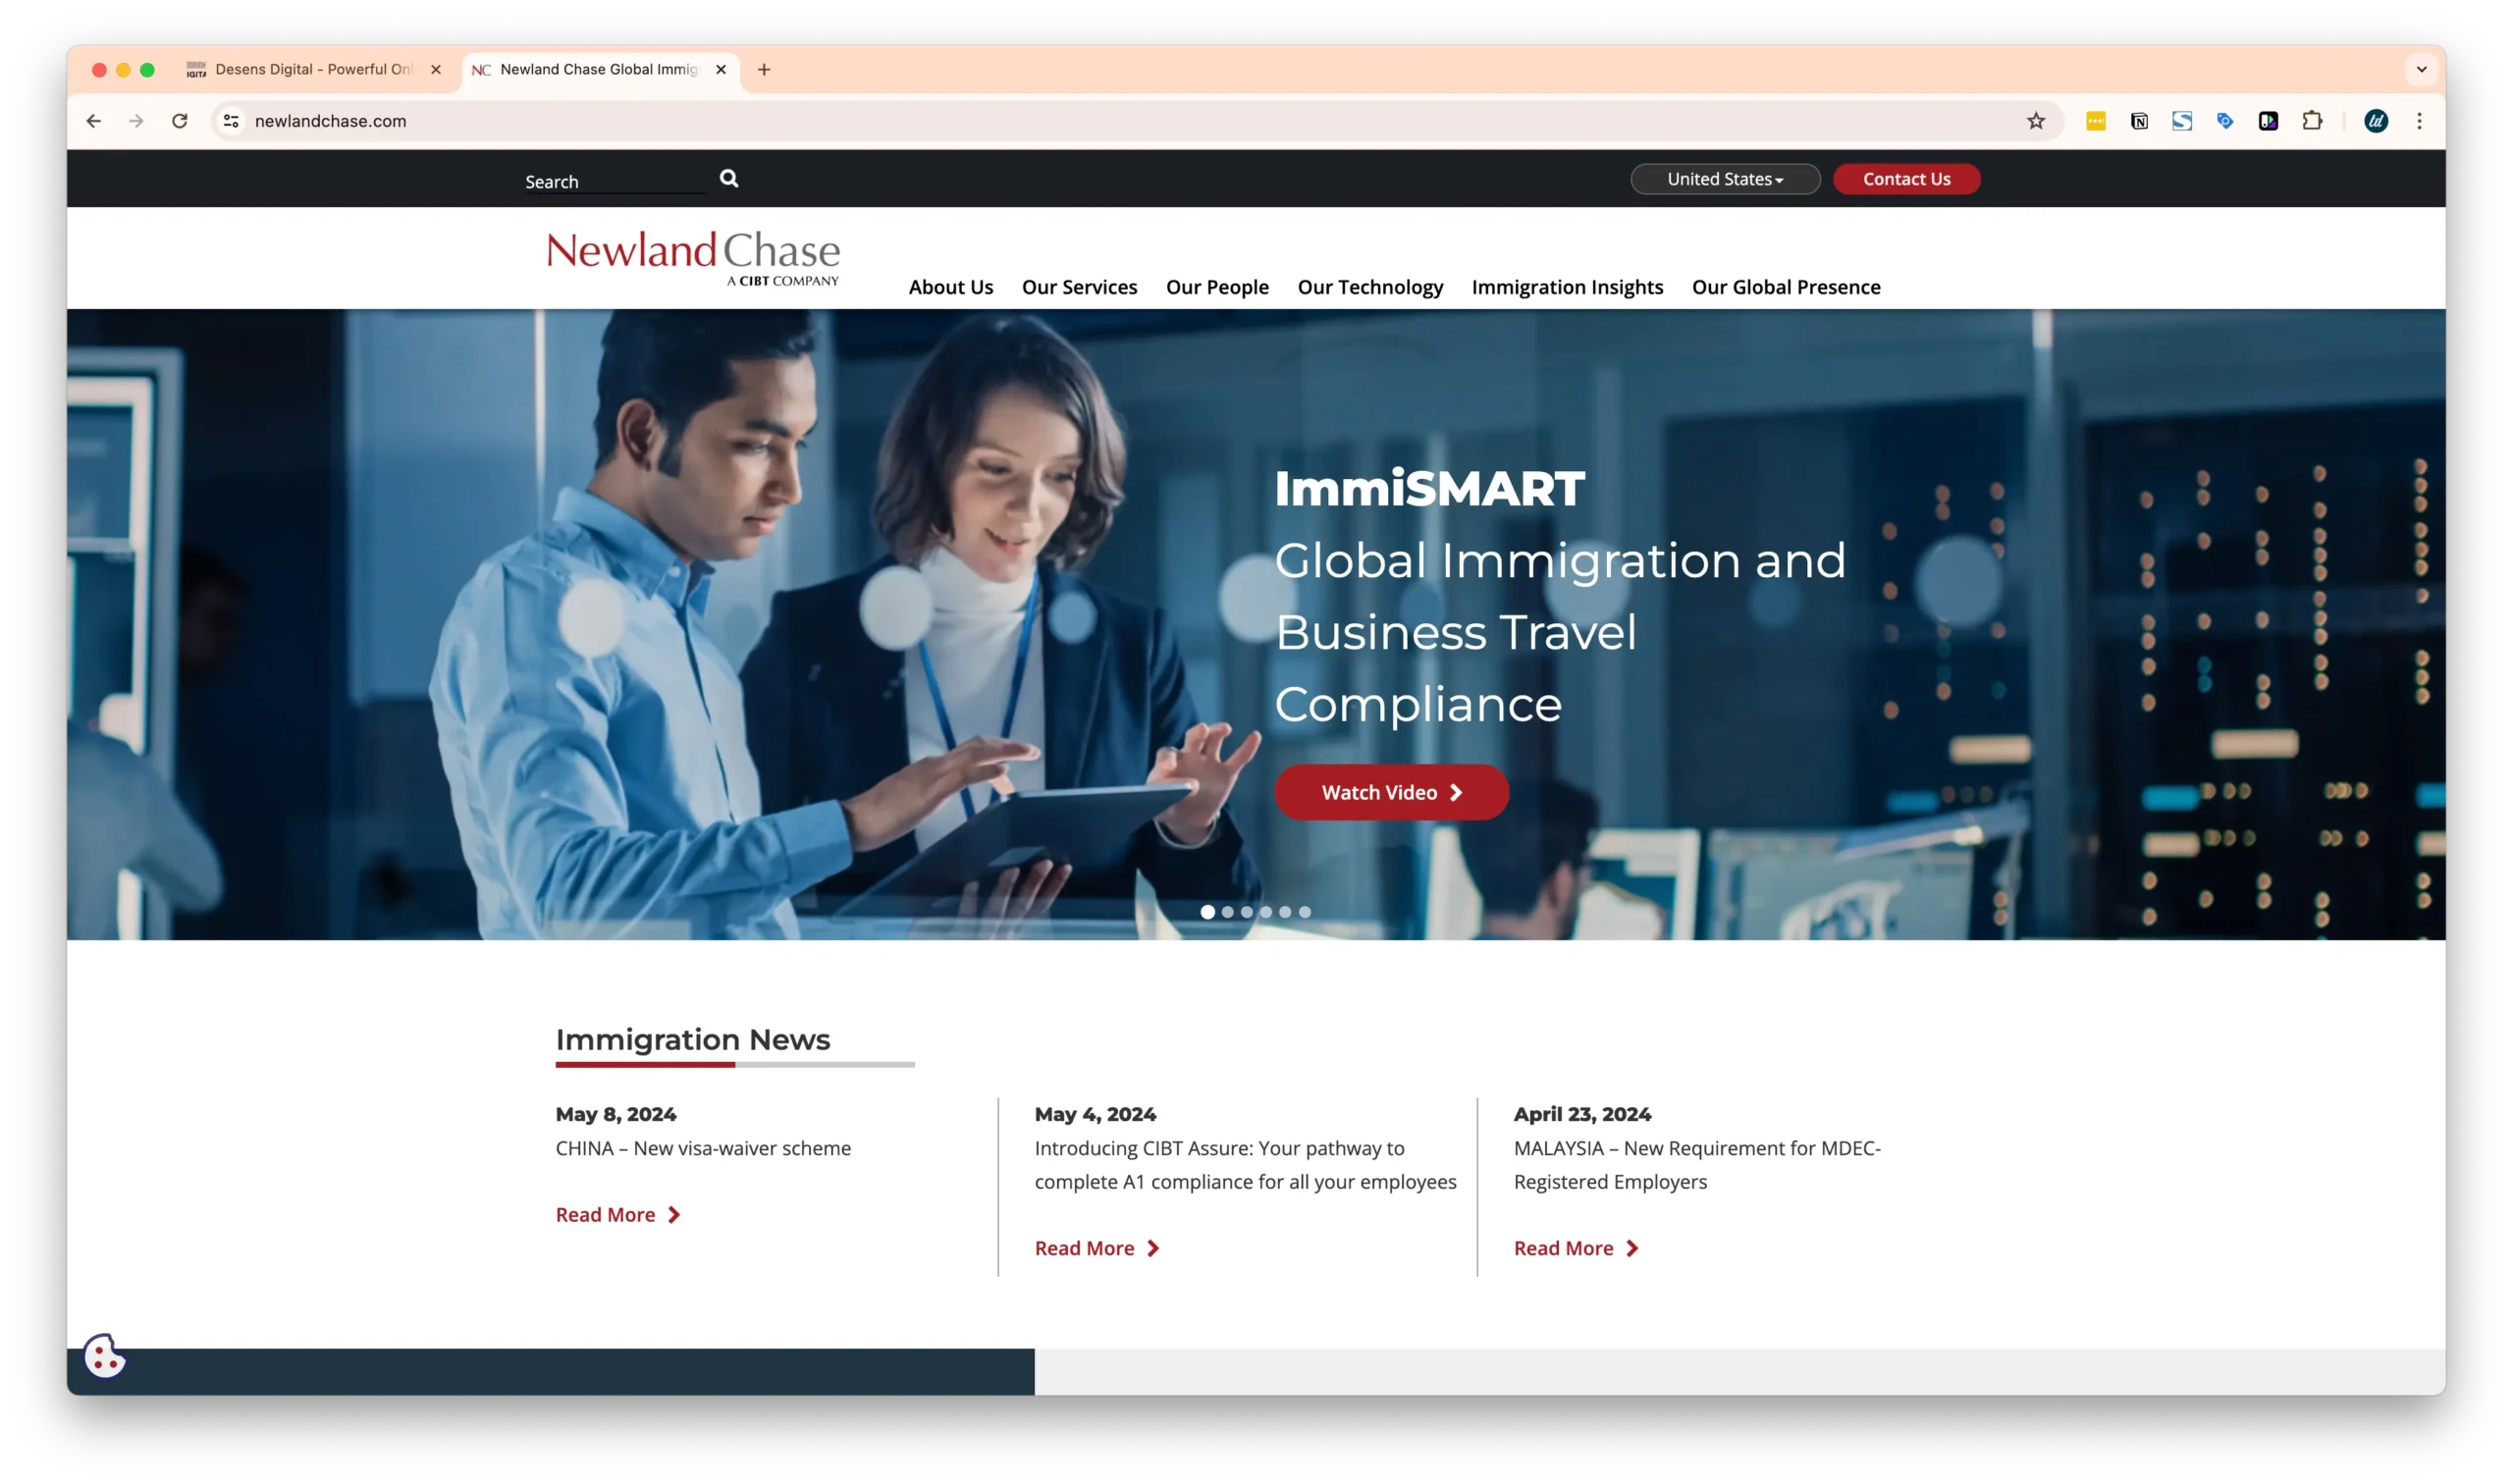 A homepage for Newland Chase featuring a banner with two professionals looking at a tablet. The page highlights their global immigration and business travel compliance services, with recent immigration news listed below.